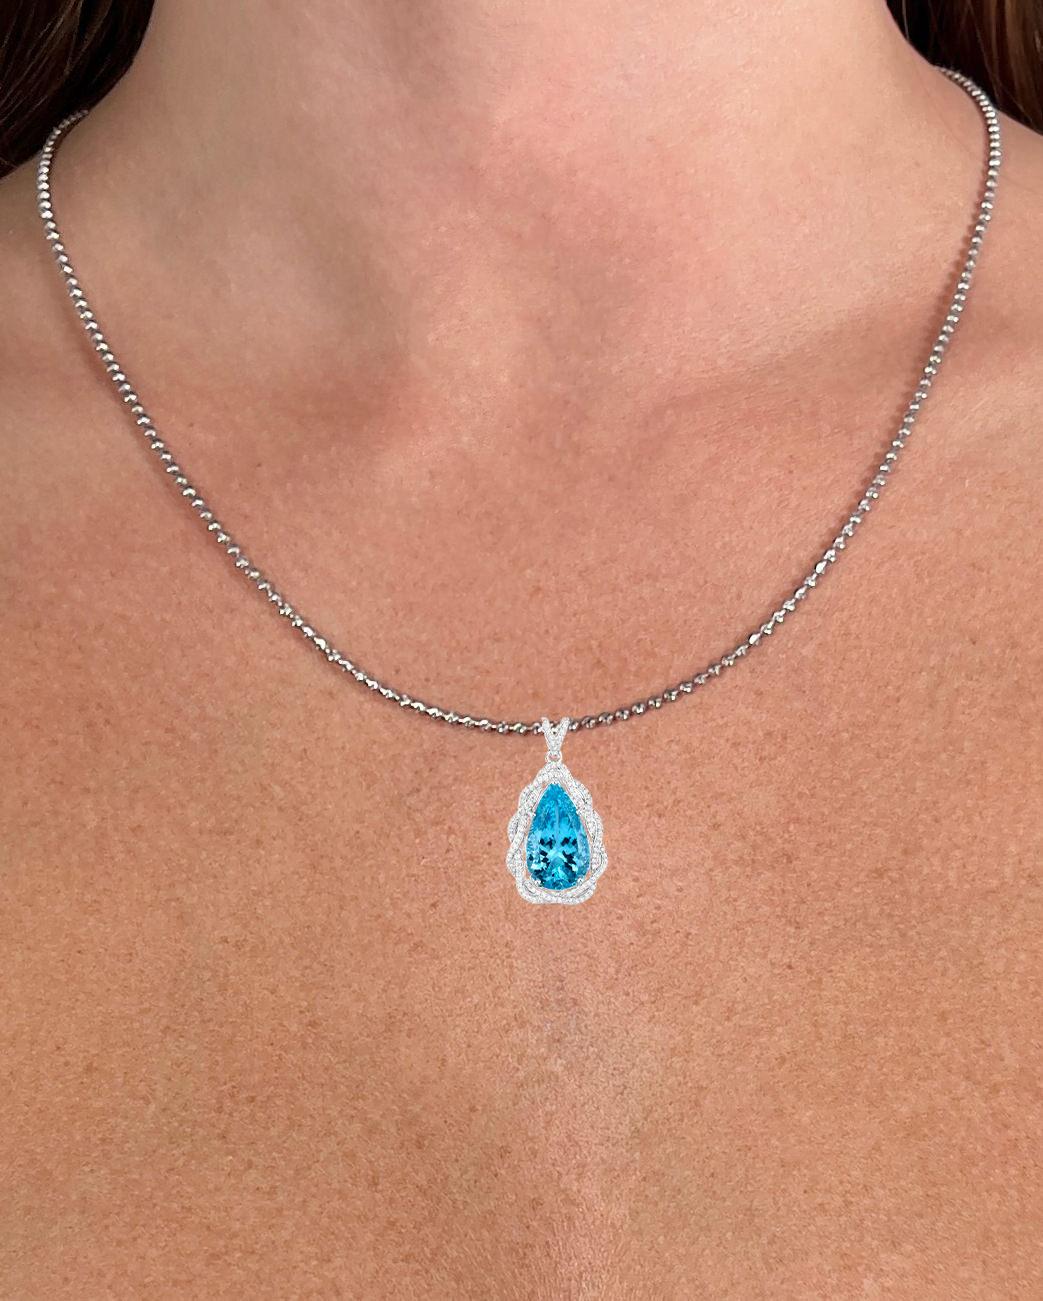 Contemporary Important Aquamarine Pendant Necklace With Diamonds 11.90 Carats 14K Gold For Sale